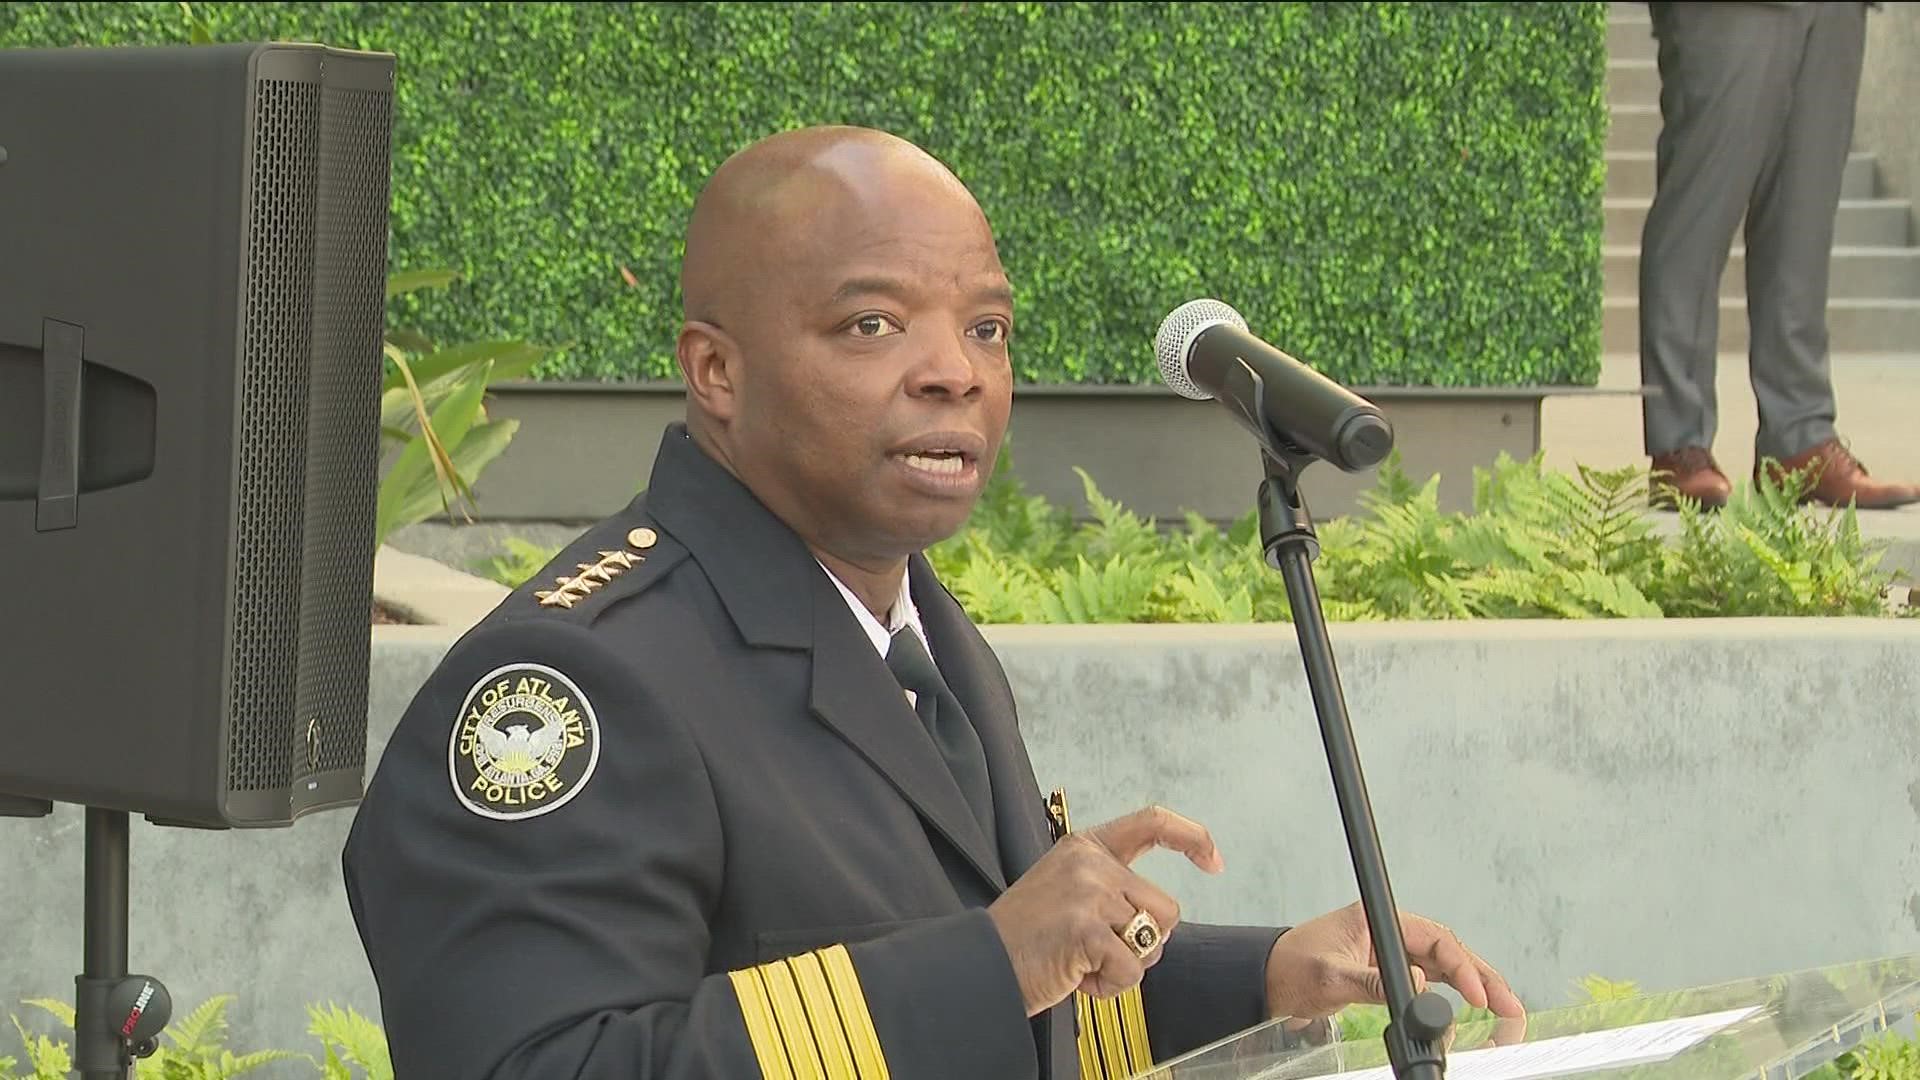 Atlanta's new mayor and police chief unveiled a new police precinct in the heart of Buckhead.